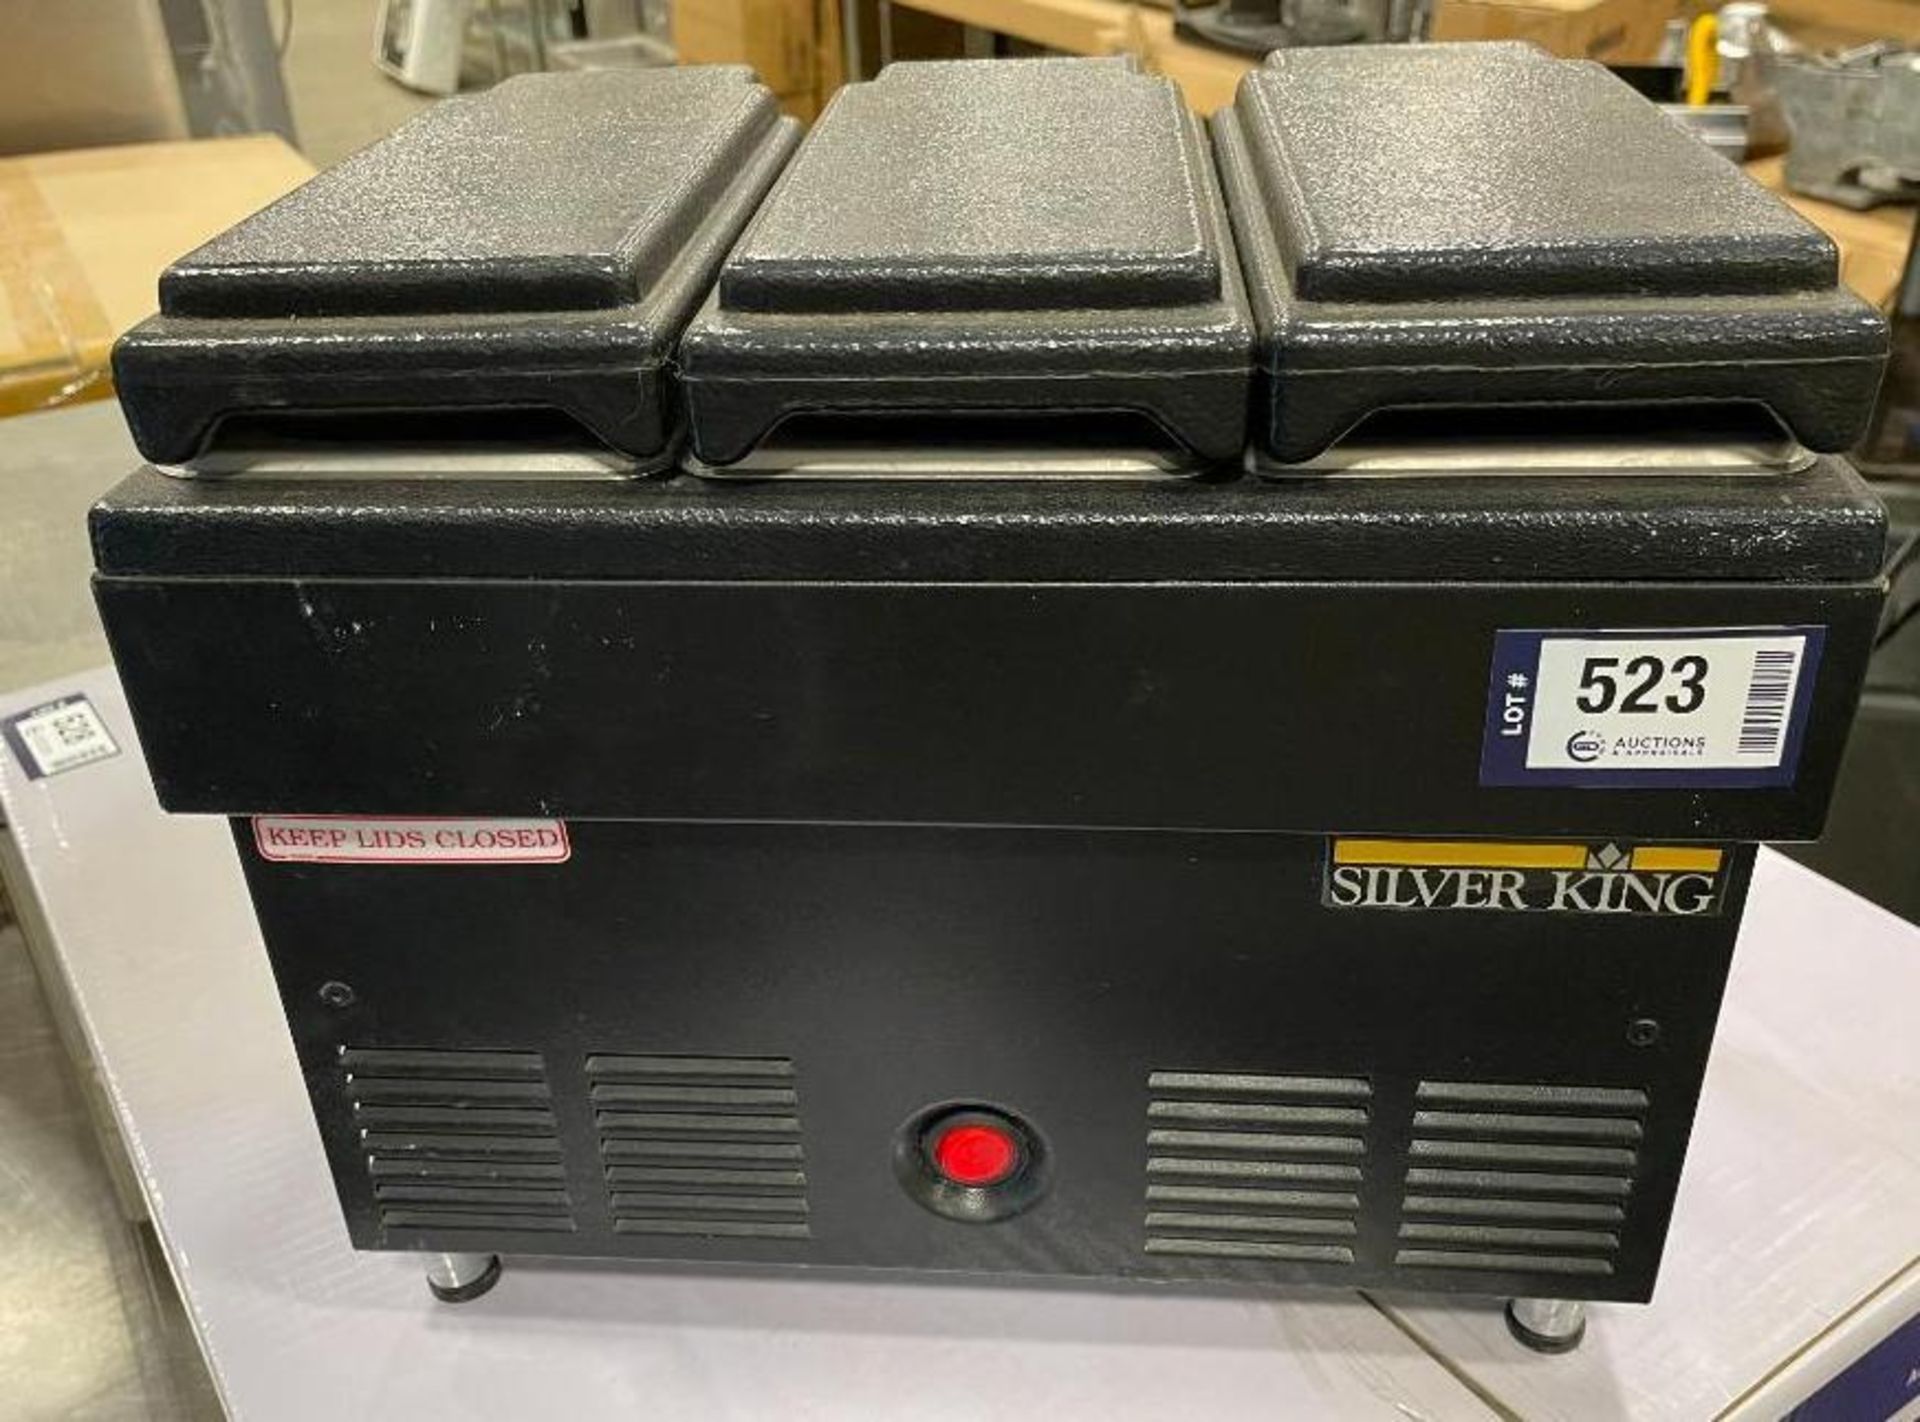 SILVERKING SKPS3-NA COUNTERTOP REFRIGERATED PREP STATION - Image 2 of 7